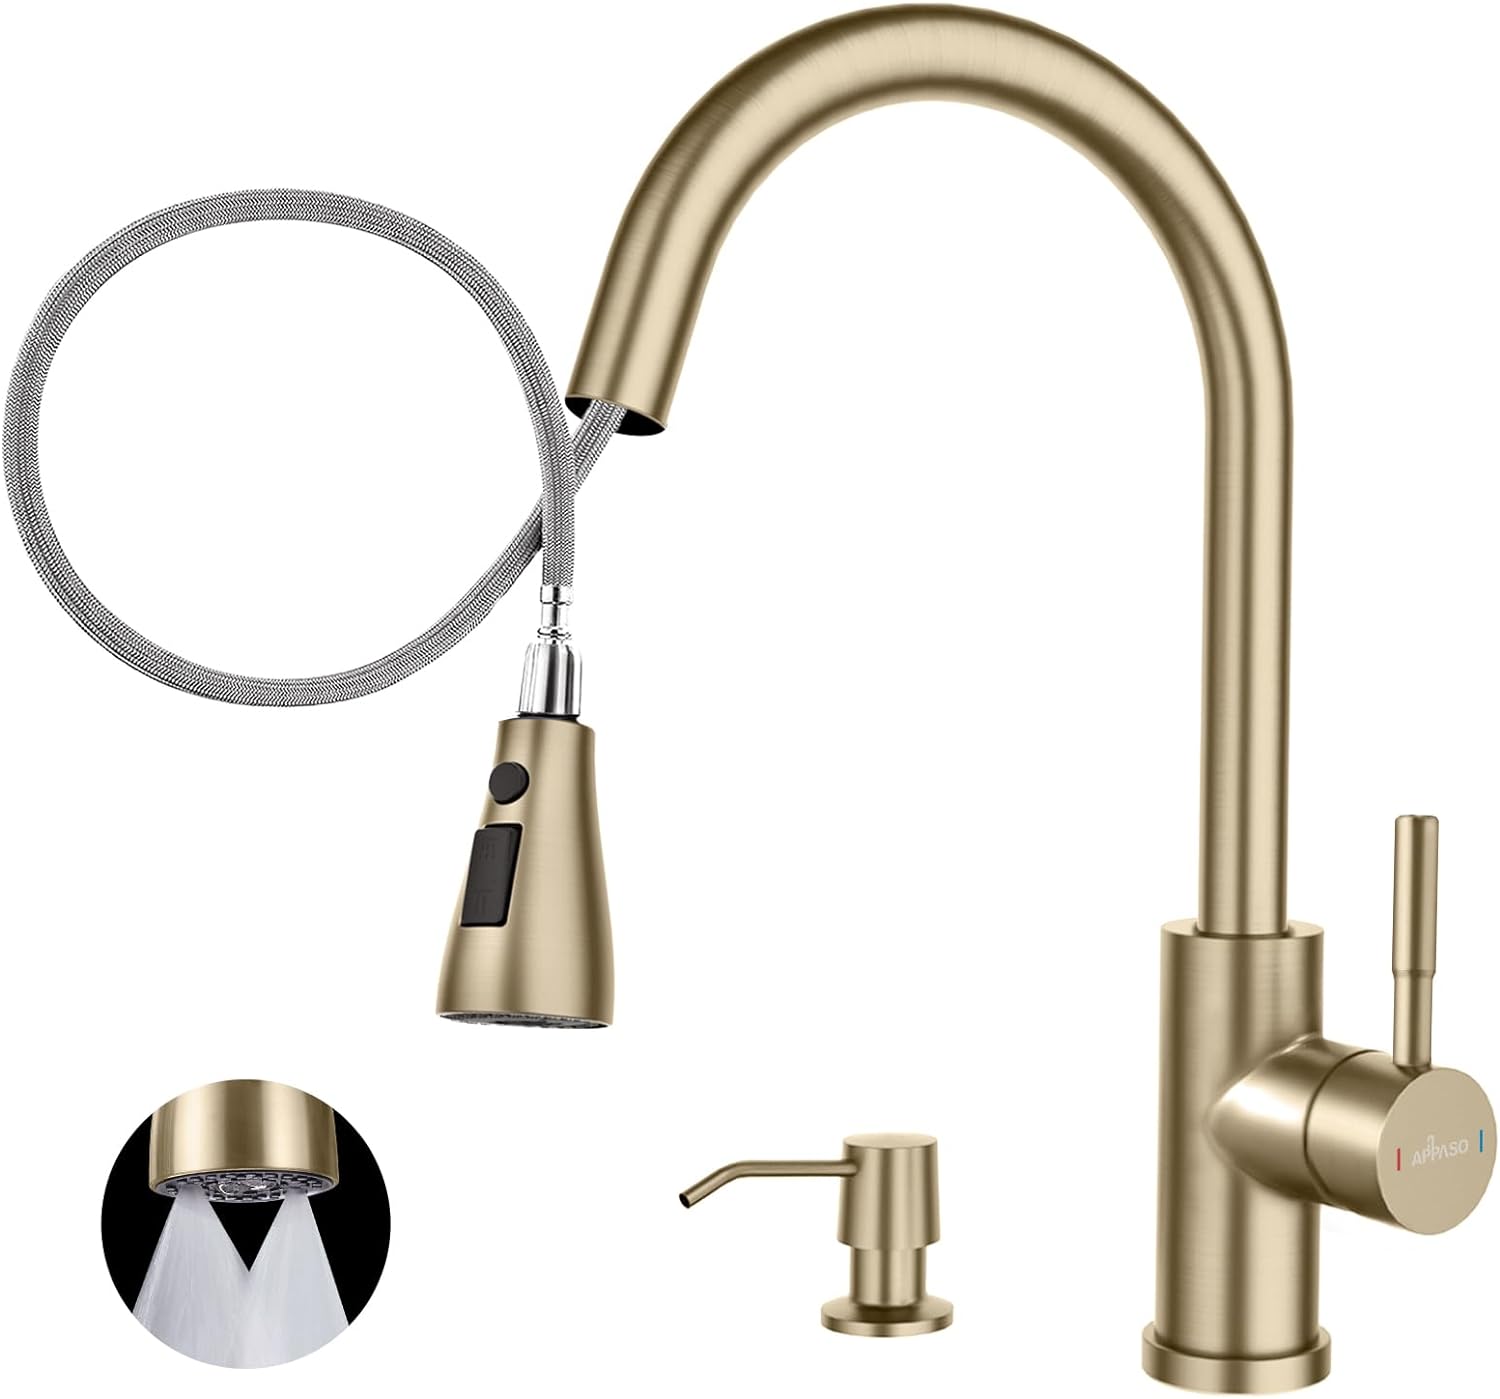 APPASO Gold Kitchen Faucet with Soap Dispenser, Brushed Gold 2 Hole Kitchen Faucet with Pull Down Sprayer 3 Modes, Champagne Gold Kitchen Sink Faucet, High Arch Faucet Kitchen Without Deck Plate